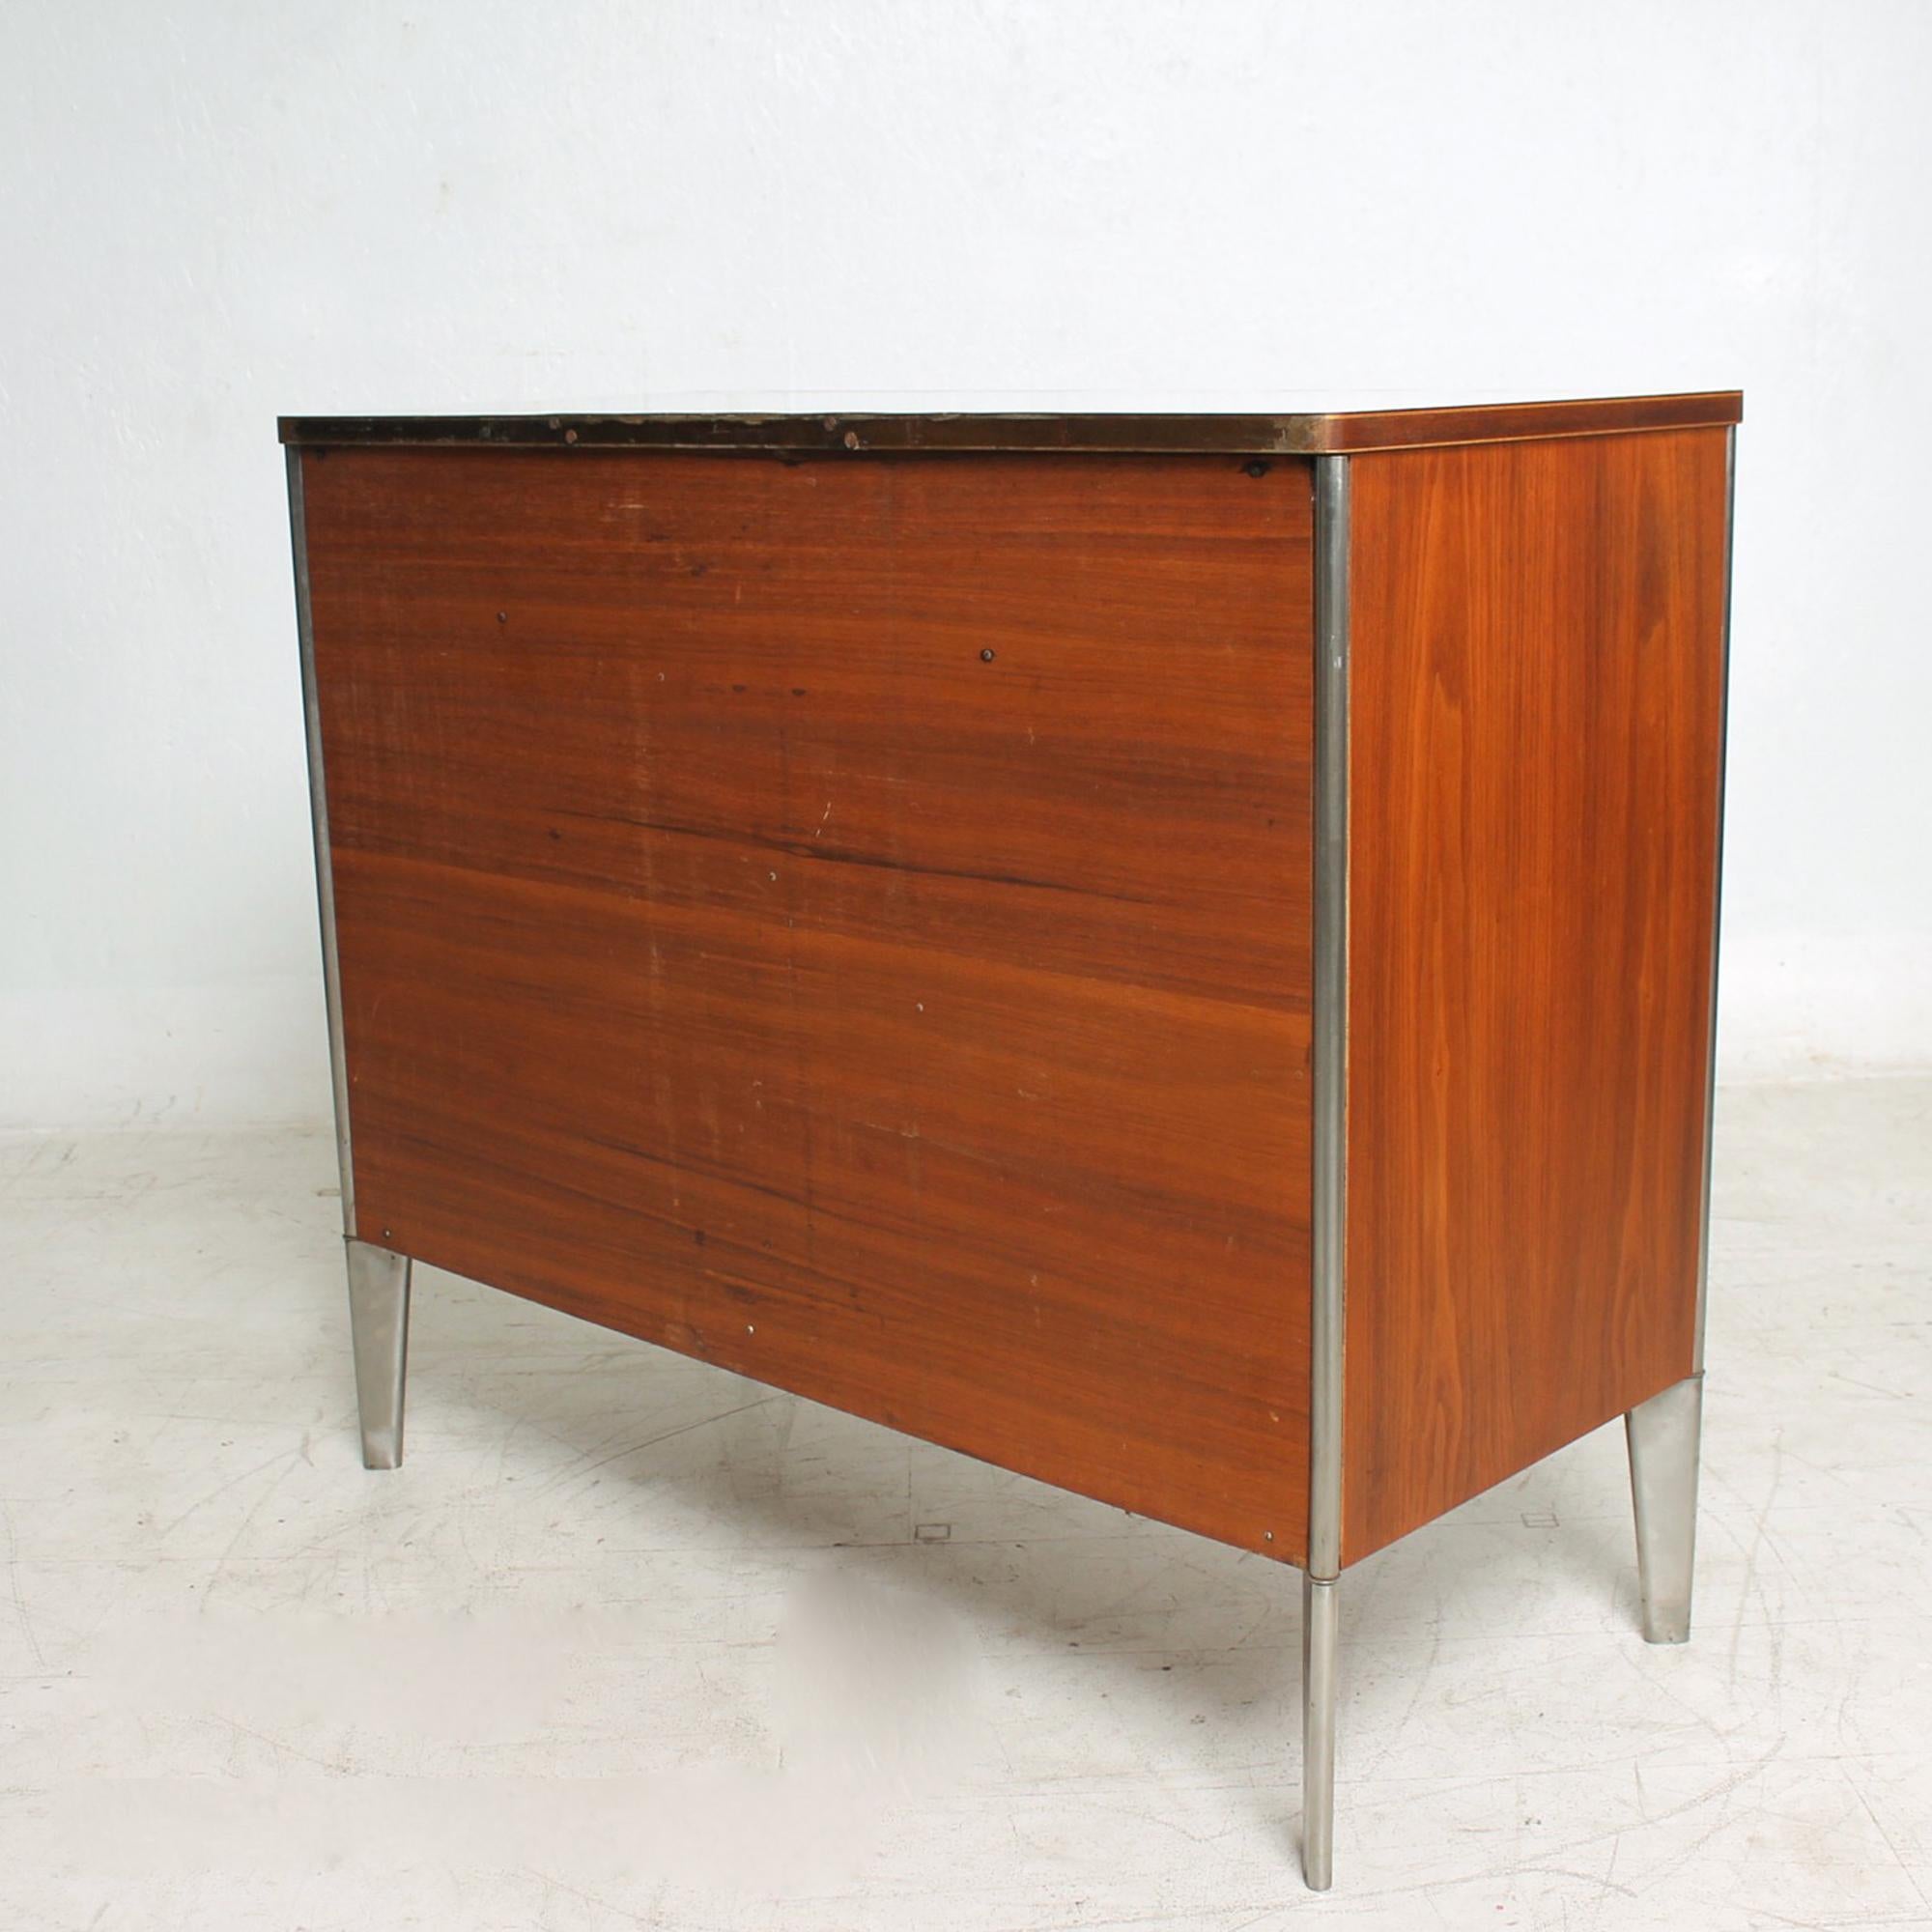 American Modern Industrial Storage Cabinet by Raymond Loewy for Hill-Rom USA 1950s